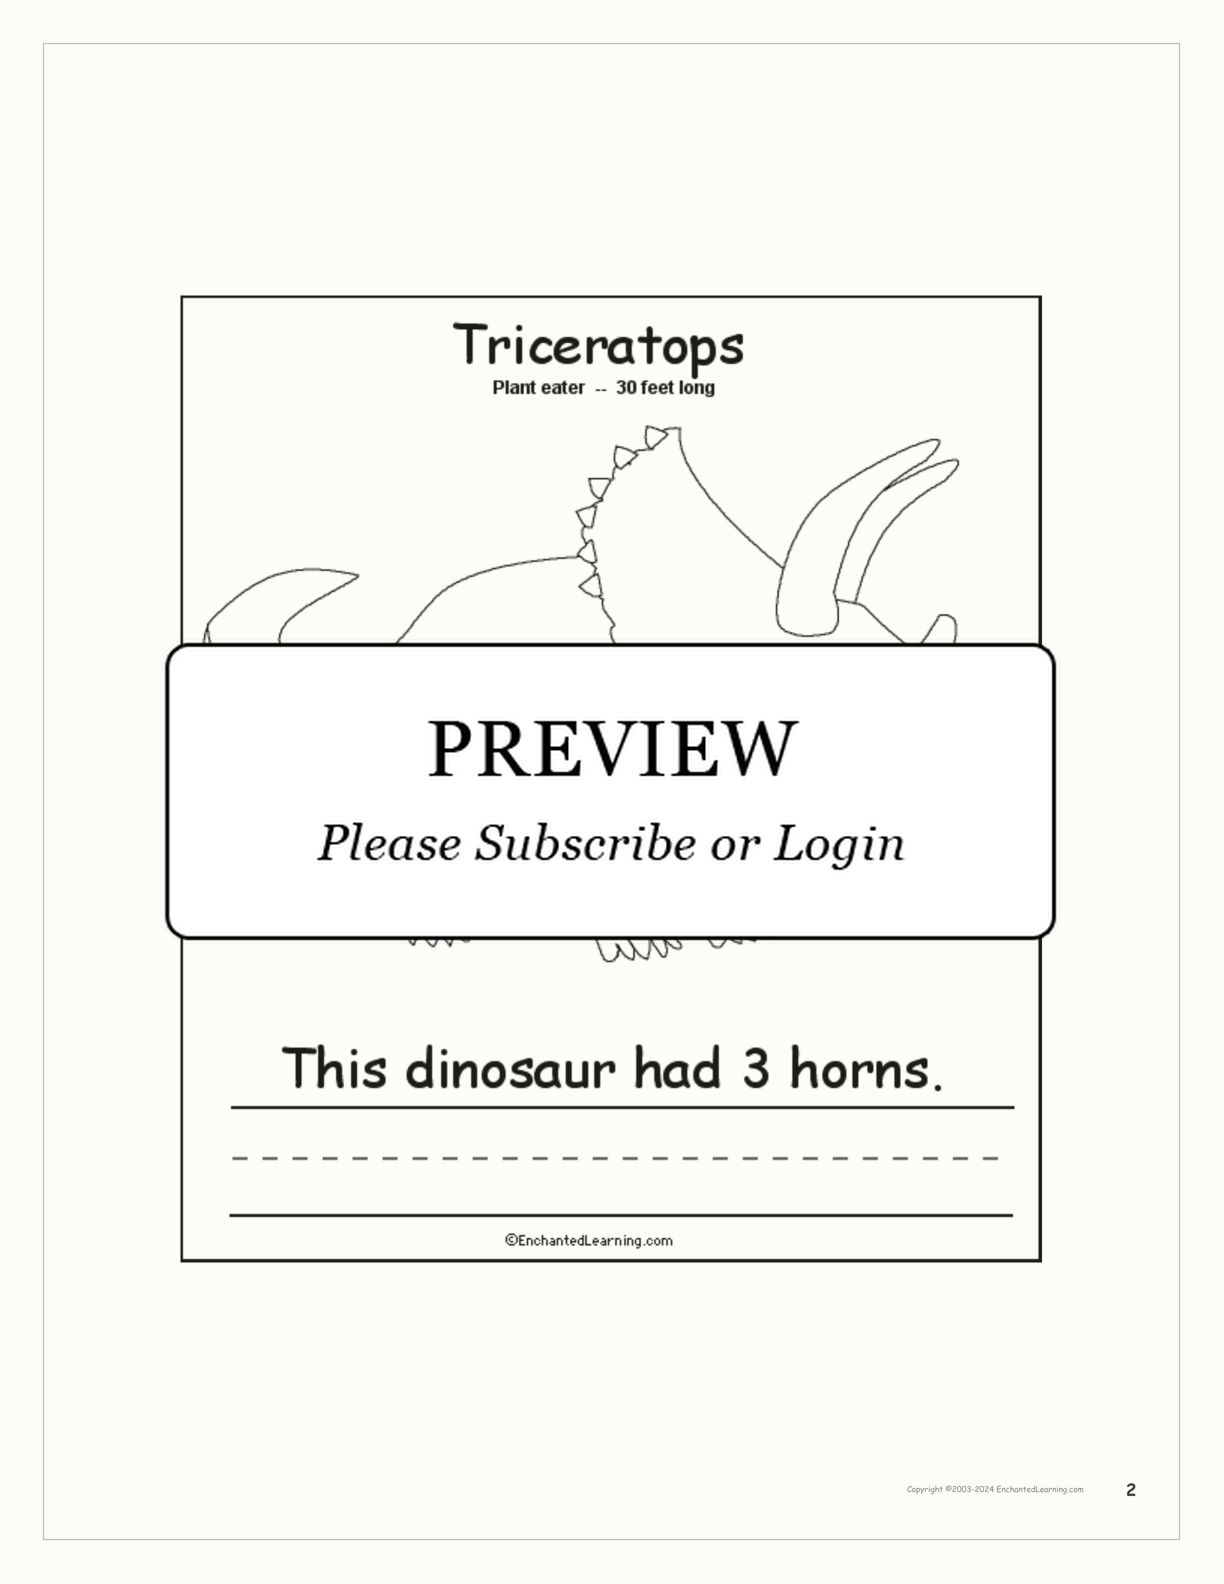 This Dinosaur... Early Reader Book interactive printout page 2